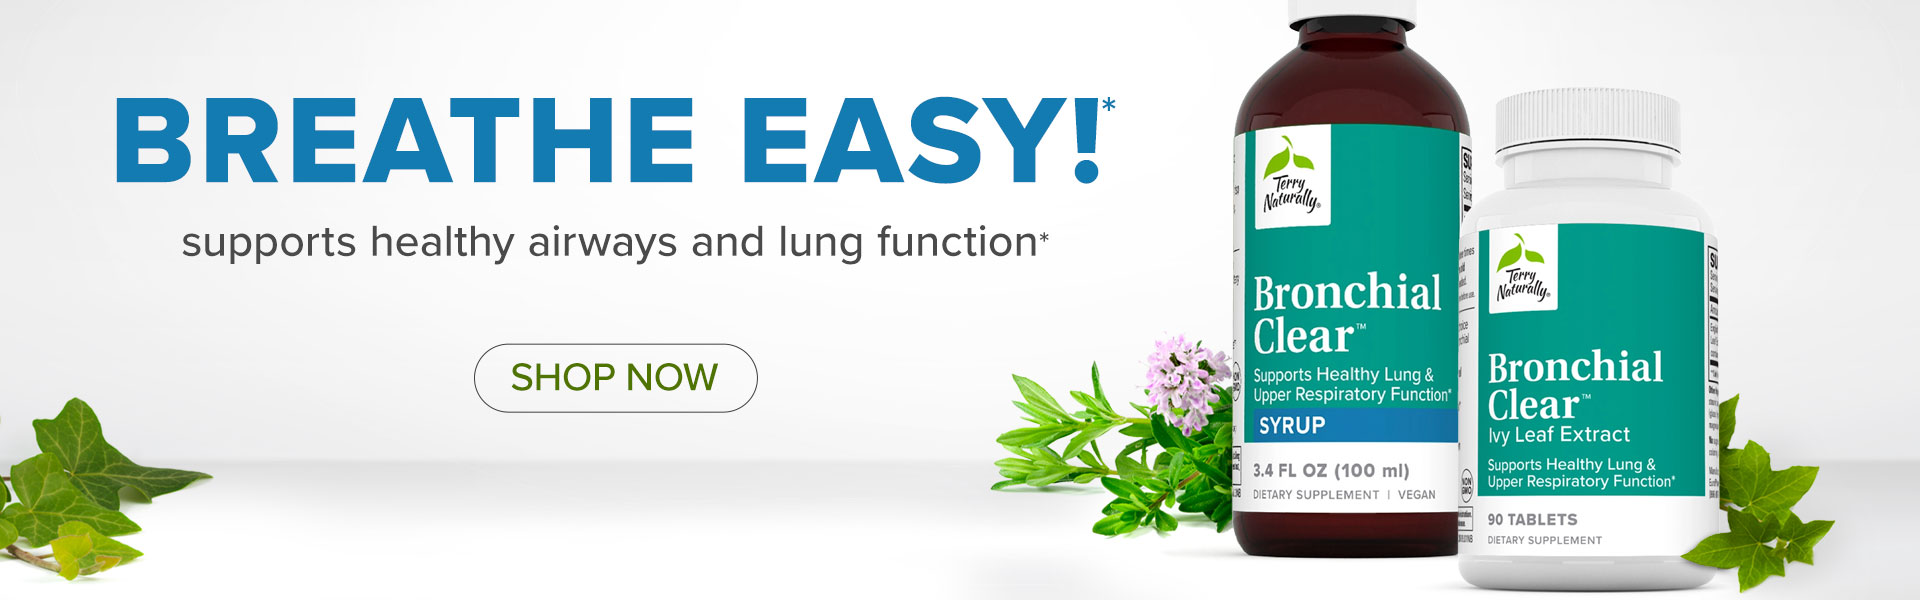 BREATHE EASY*  | Supports healthy airways and lung function*